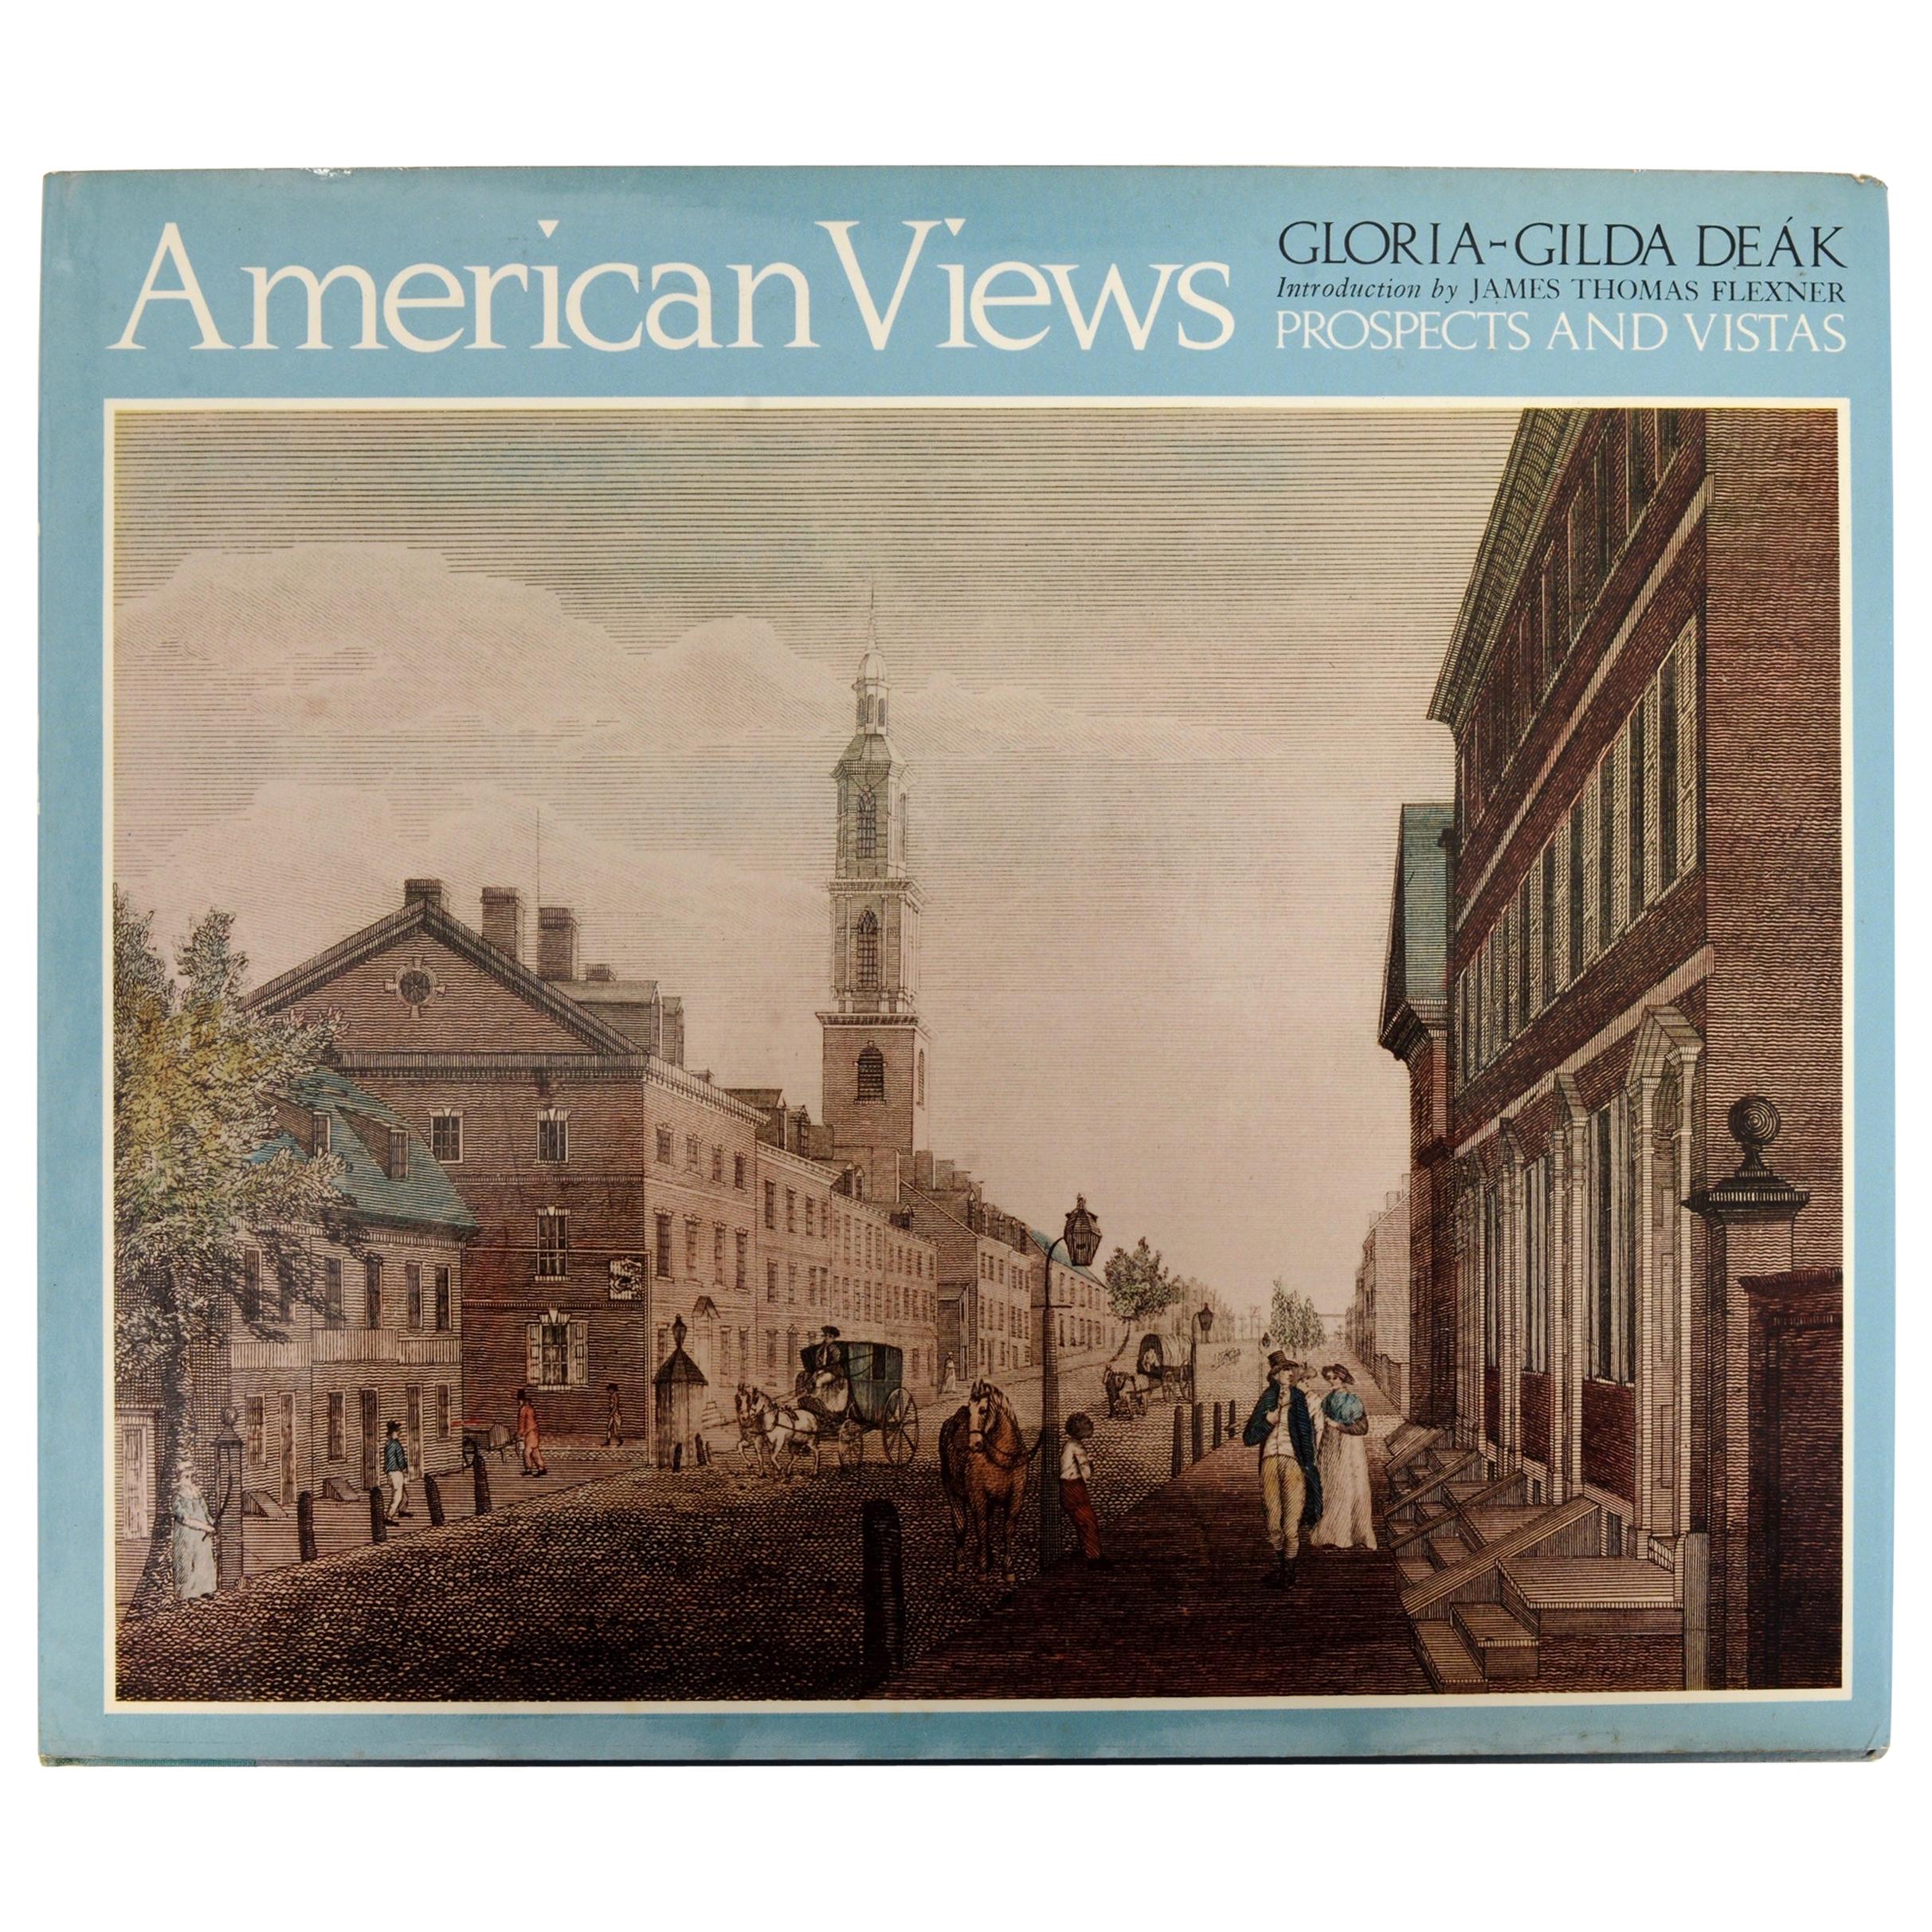 American Views Prospects and Vistas by Gloria-Gilda Deak, 1st Ed For Sale